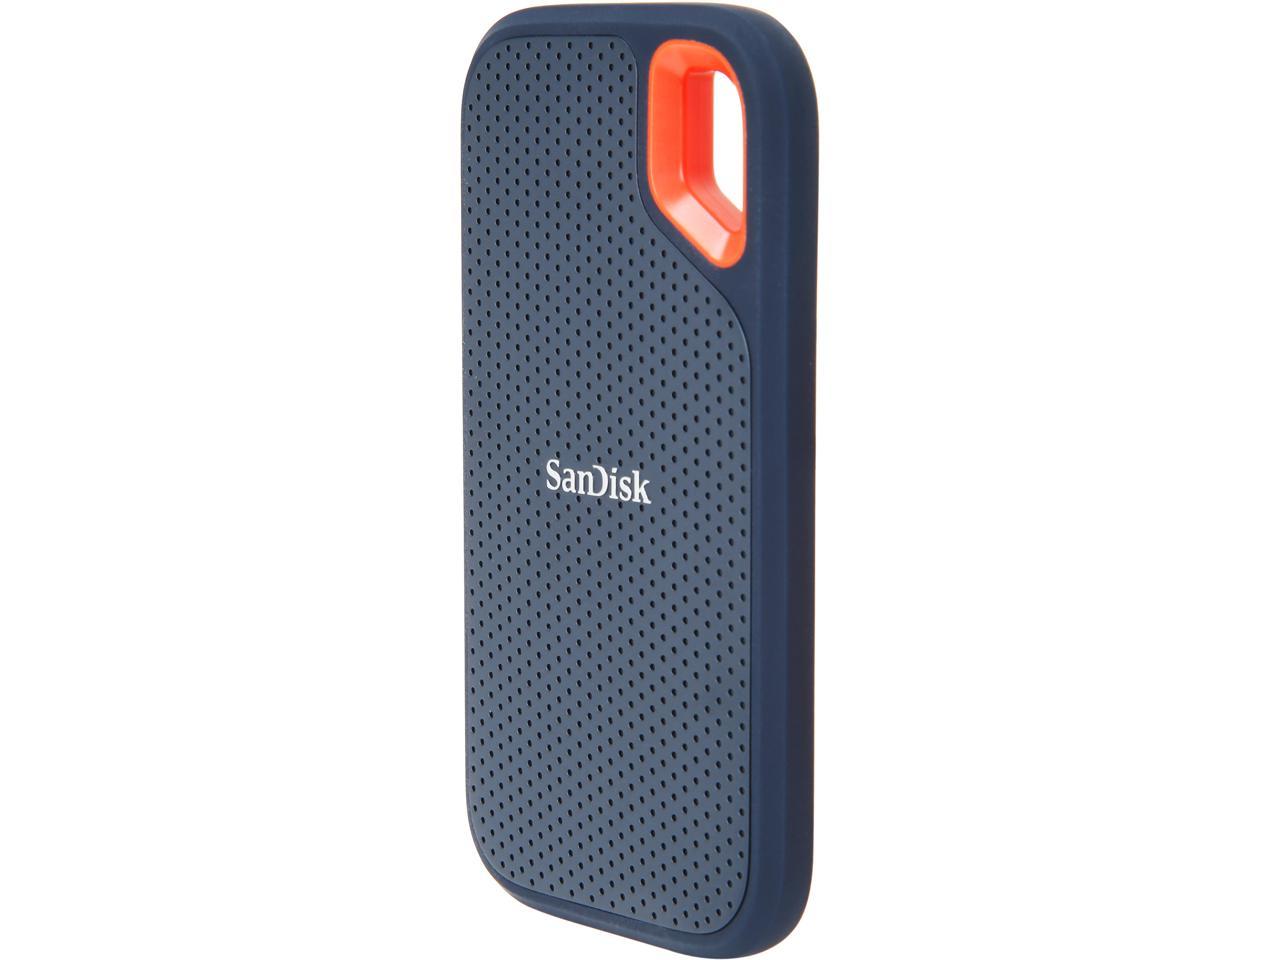 SanDisk 2TB Extreme Portable External SSD - Up to 550 MB/s - USB-C, USB 3.1  - SDSSDE60-2T00-G25